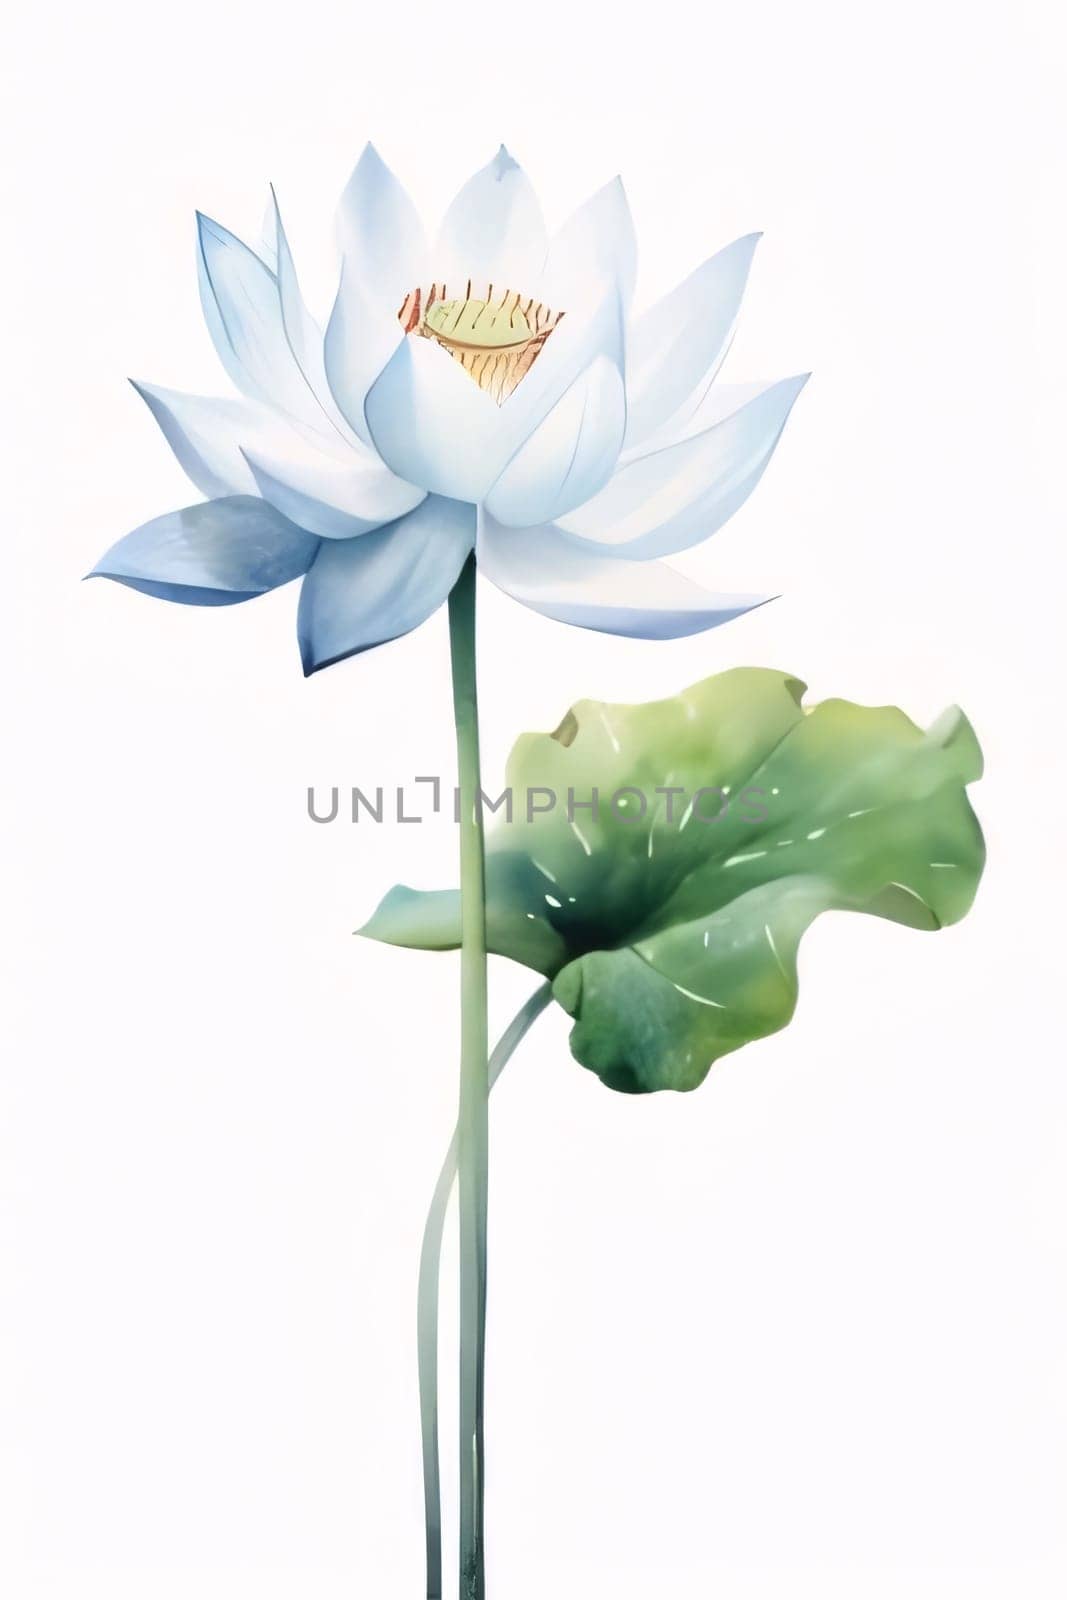 Drawn, painted white lotus flower on isolated white background. Flowering flowers, a symbol of spring, new life. A joyful time of nature waking up to life.